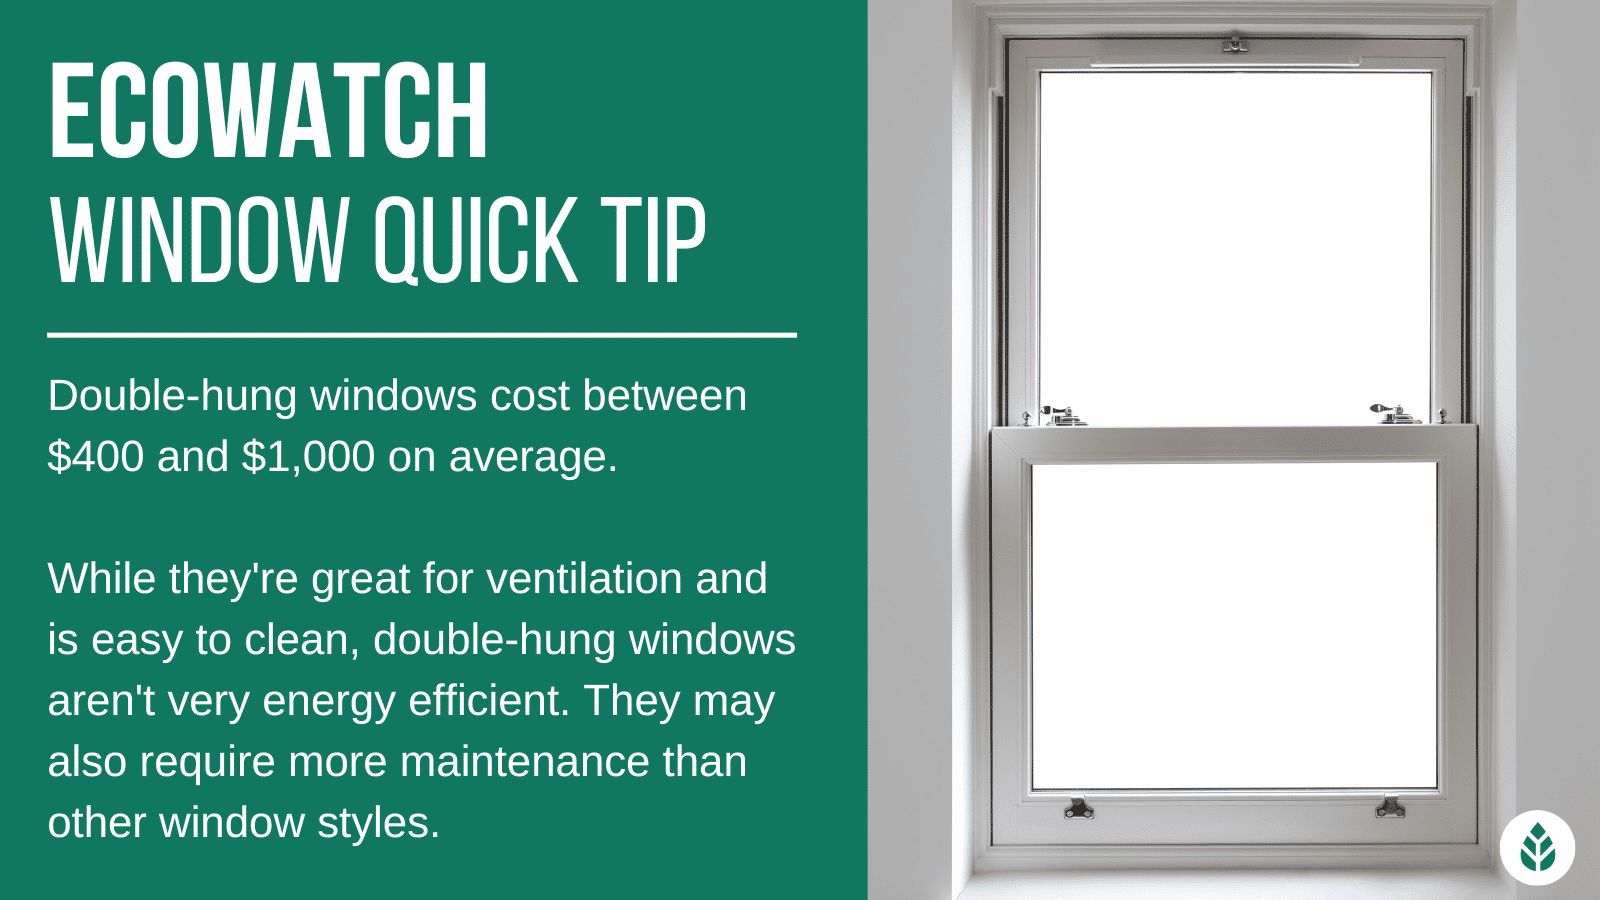 https://www.ecowatch.com/wp-content/uploads/2022/09/double-hung-window-cost-tip.png